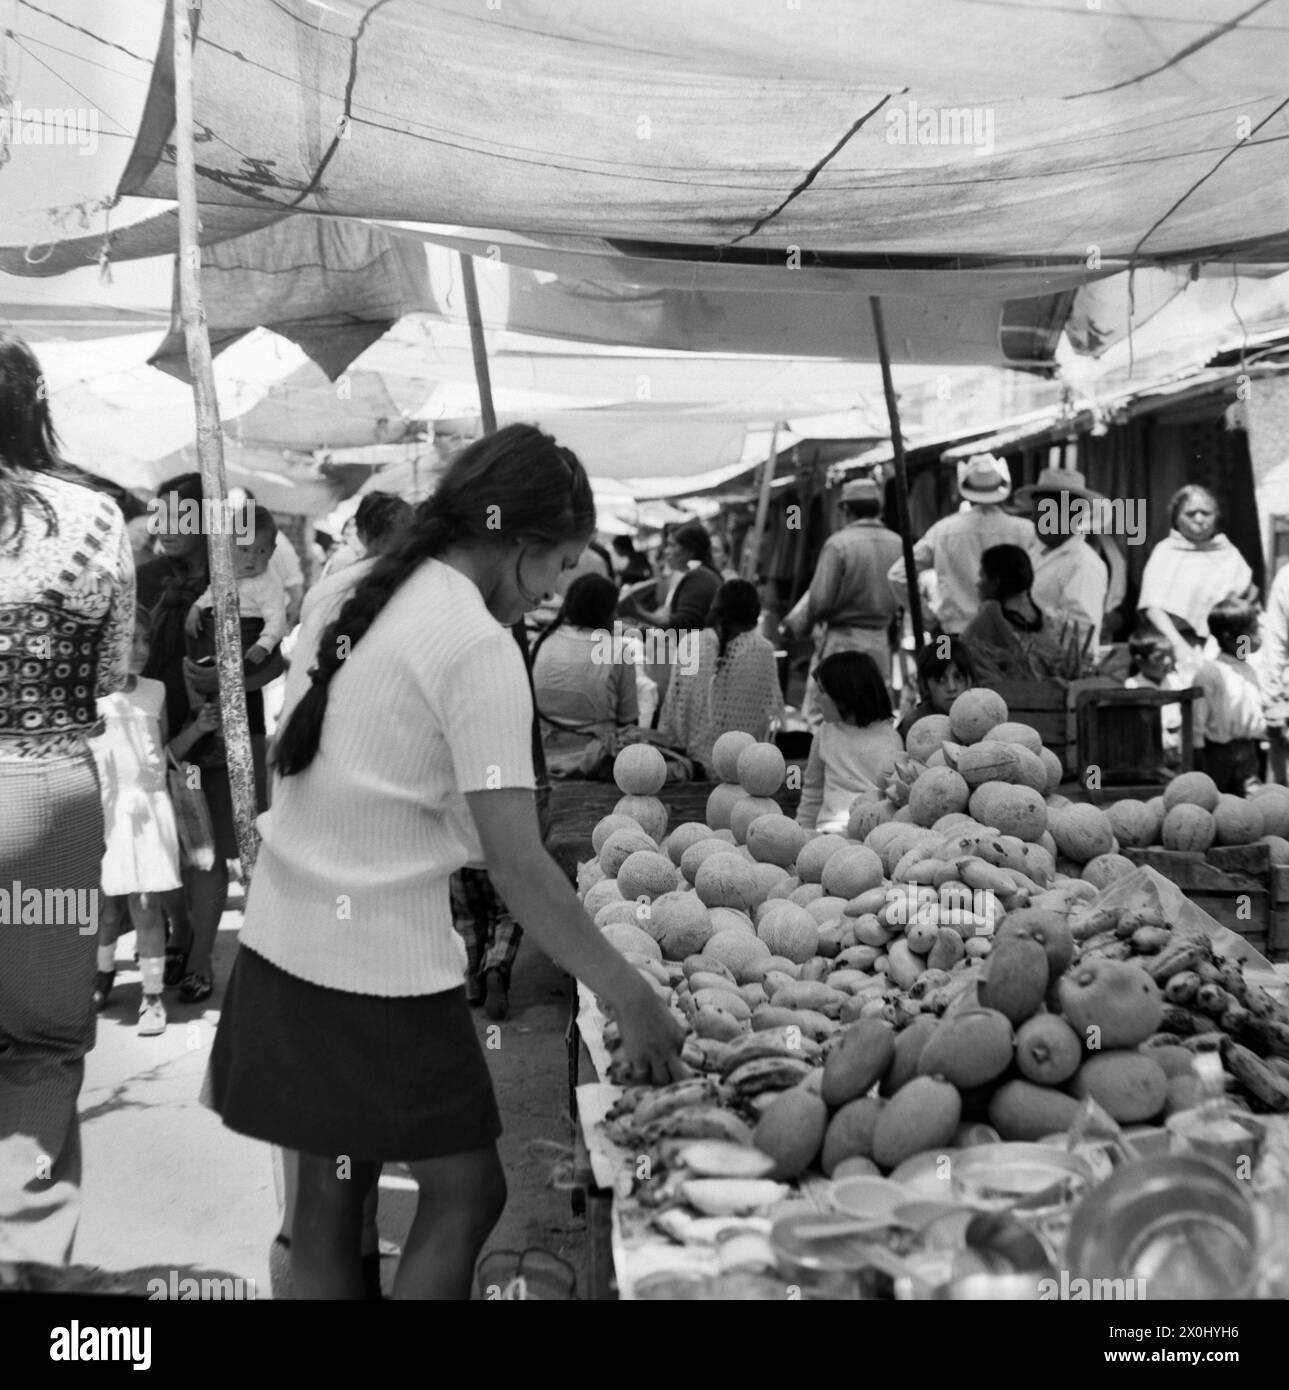 View over a market in Toluca in Mexico. A young woman stands in front of a fruit stand. Many different fruits are offered. In the background you can see more stalls and people. Tarpaulins and fabrics are stretched over the stands to provide shade. [automated translation] Stock Photo